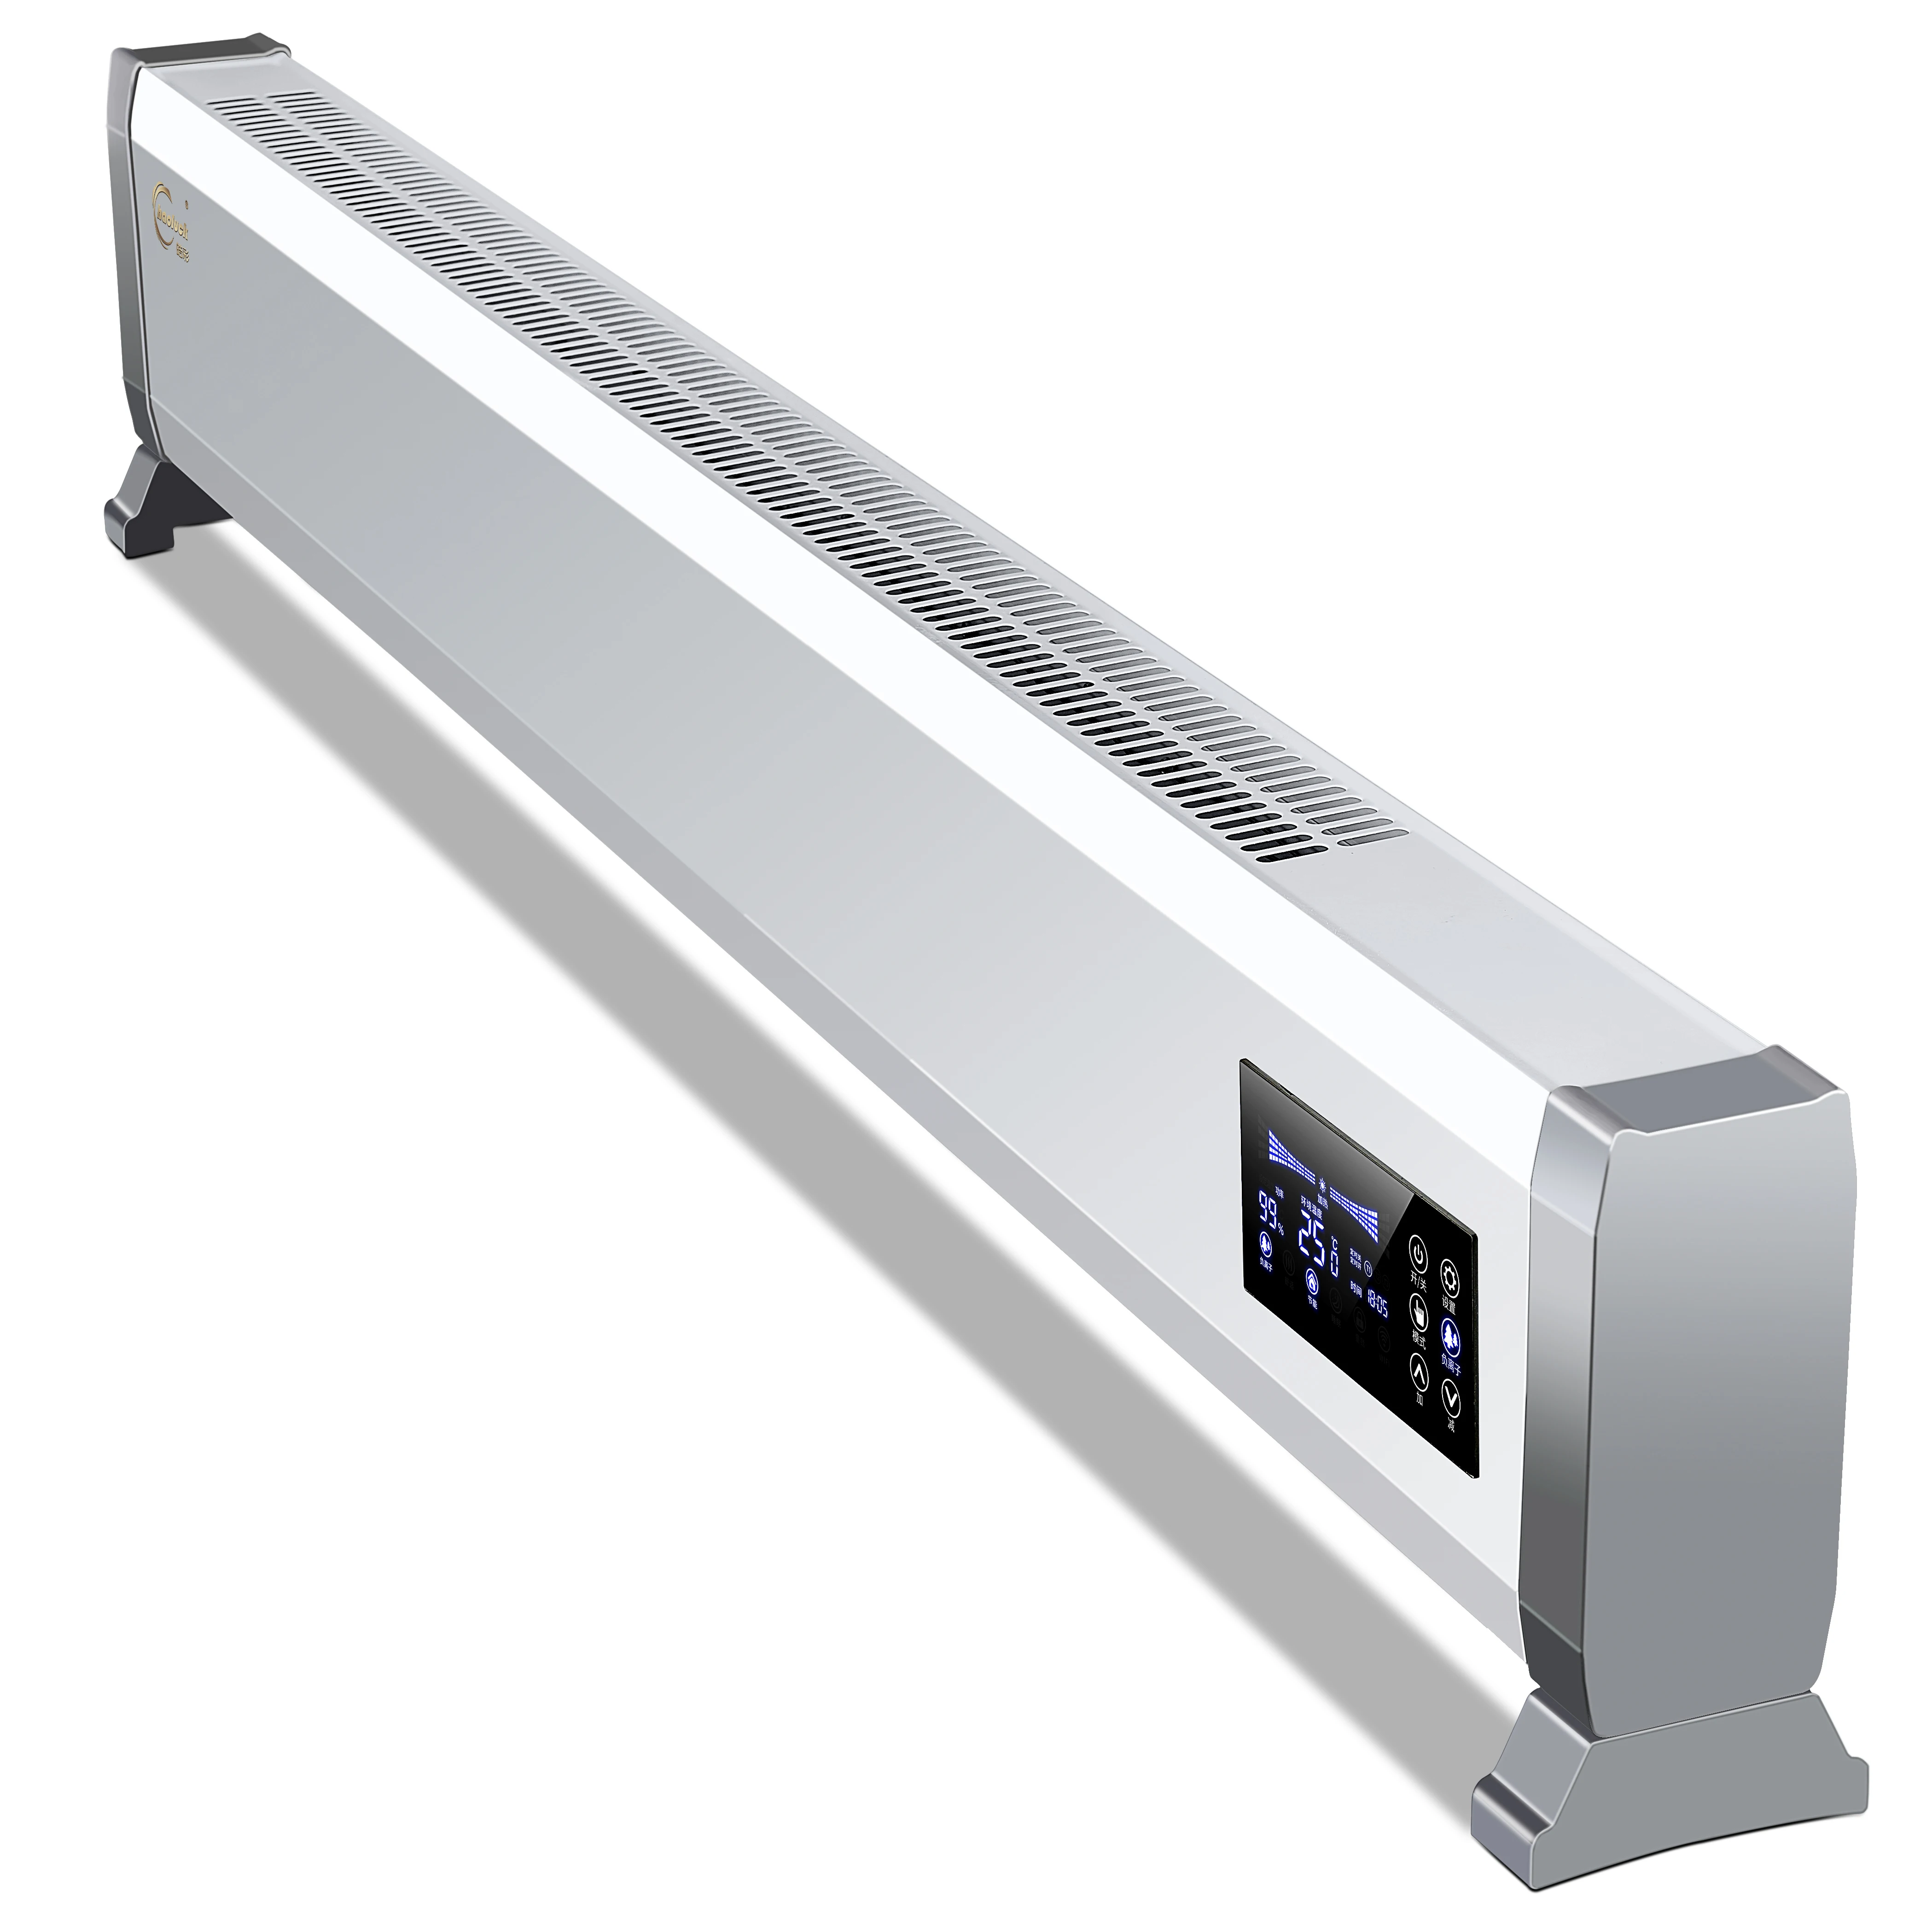 Electrical Baseboard Convector Heater With Wifi And Timer Control - Buy